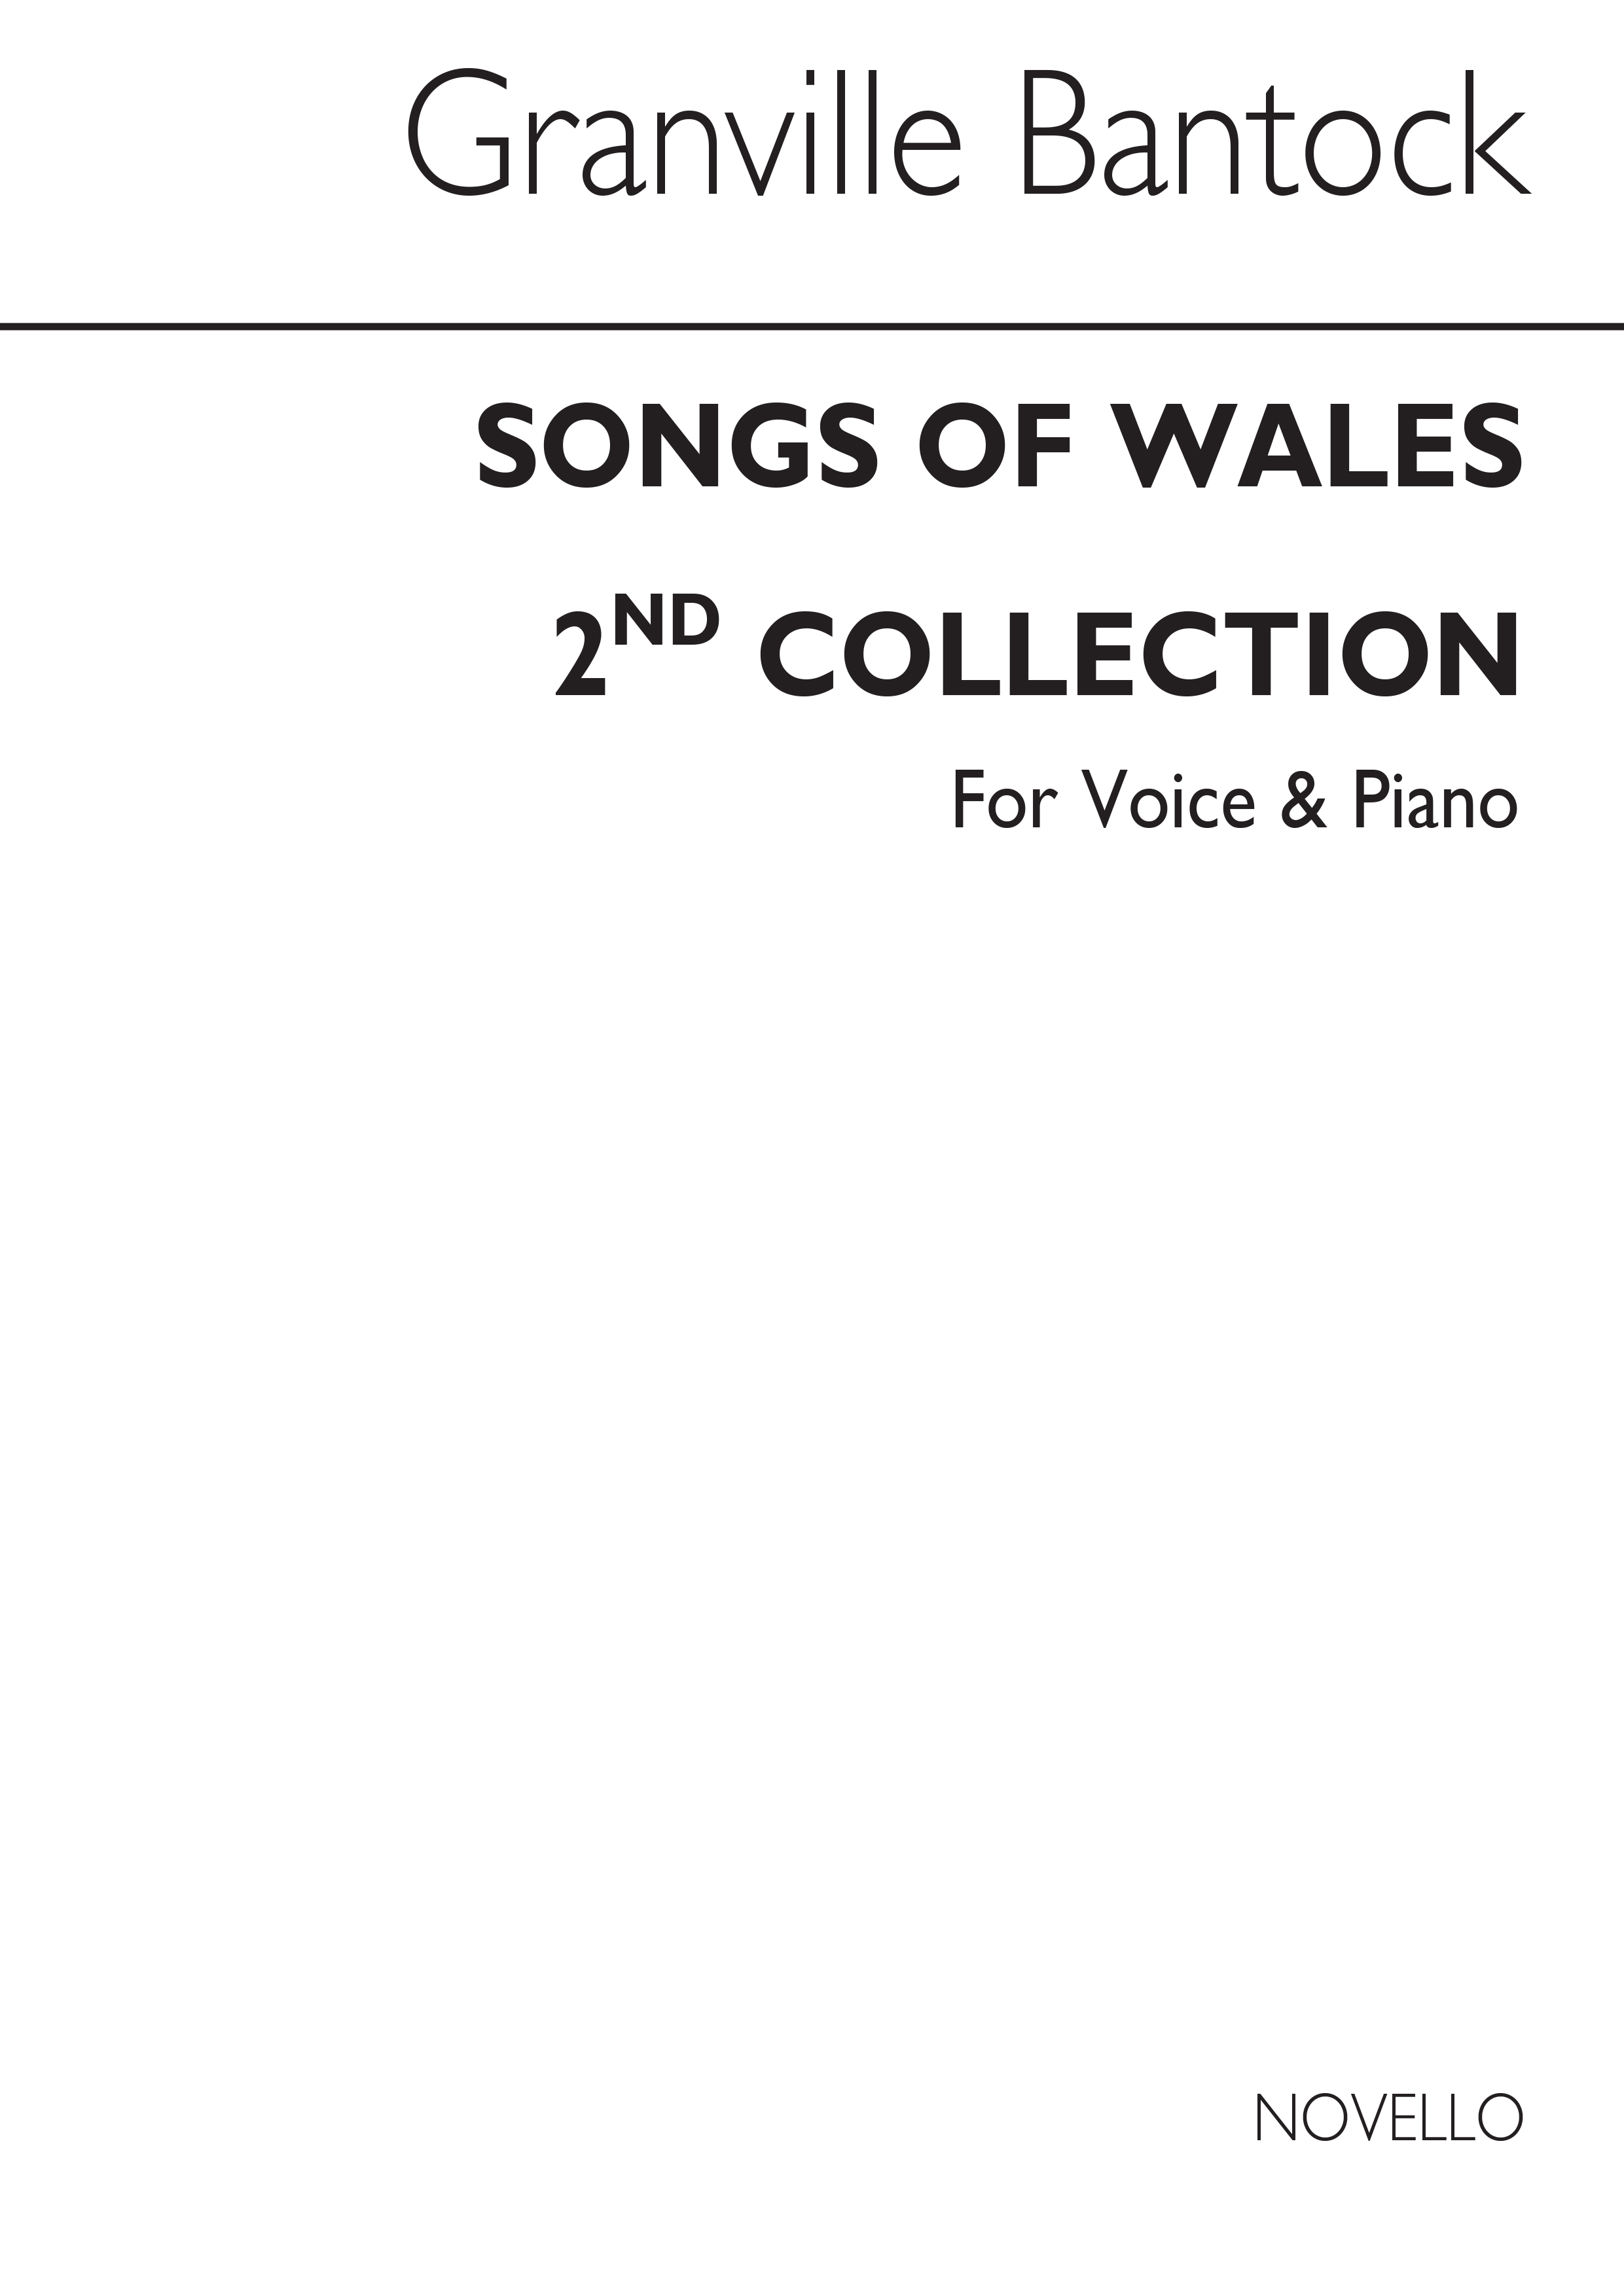 Granville Bantock: Songs Of Wales Book 2 for Voice and Piano: Voice: